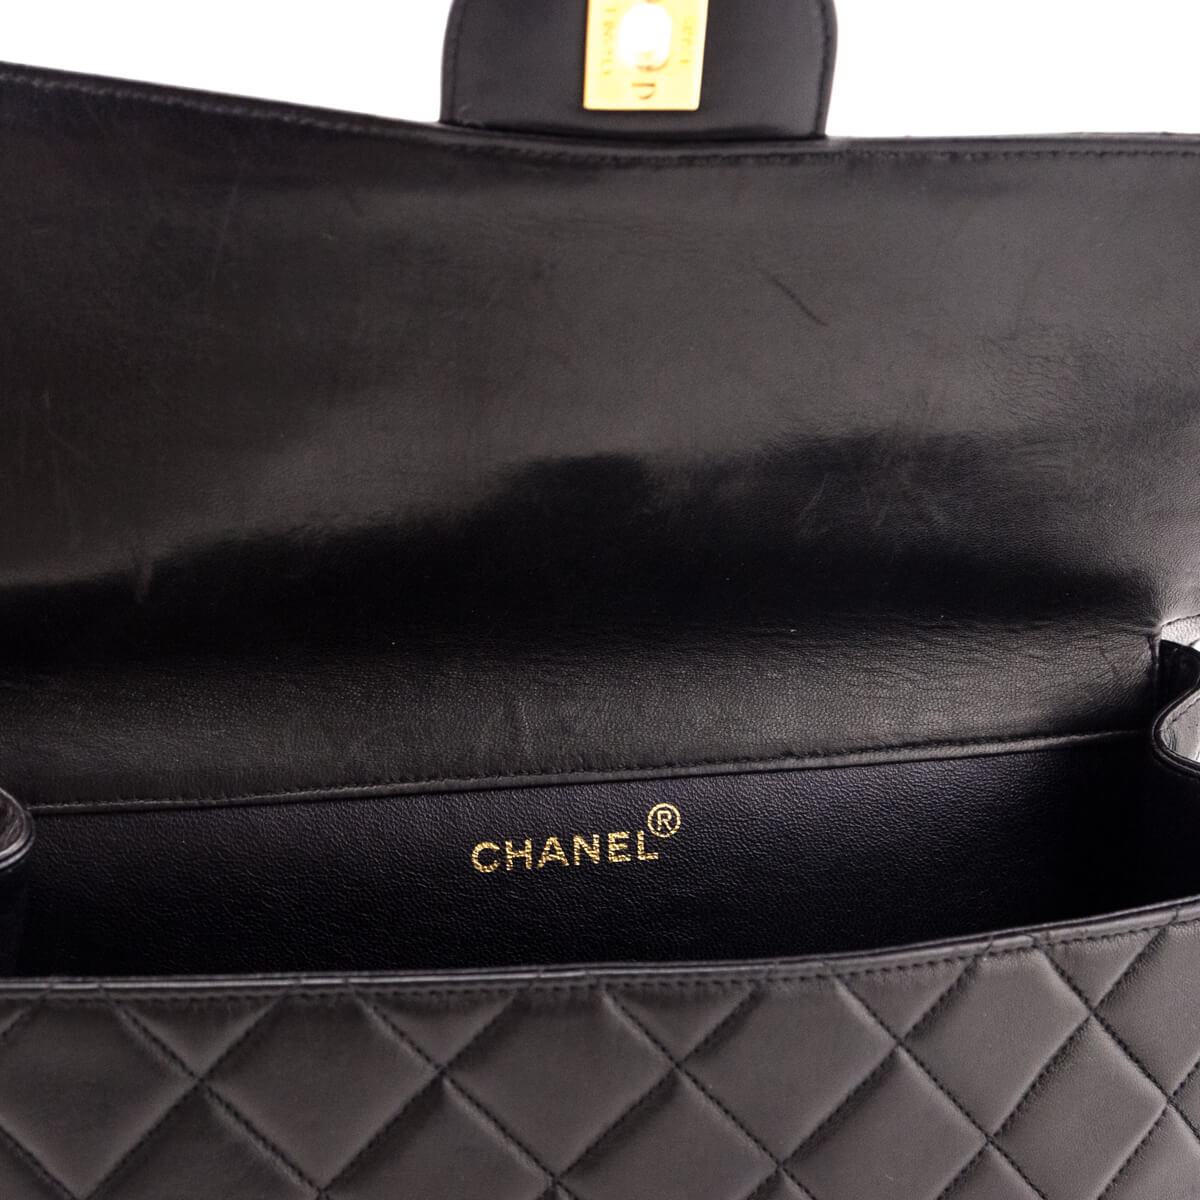 The Best Vintage Chanel Bags to Collect Now  Handbags and Accessories   Sothebys